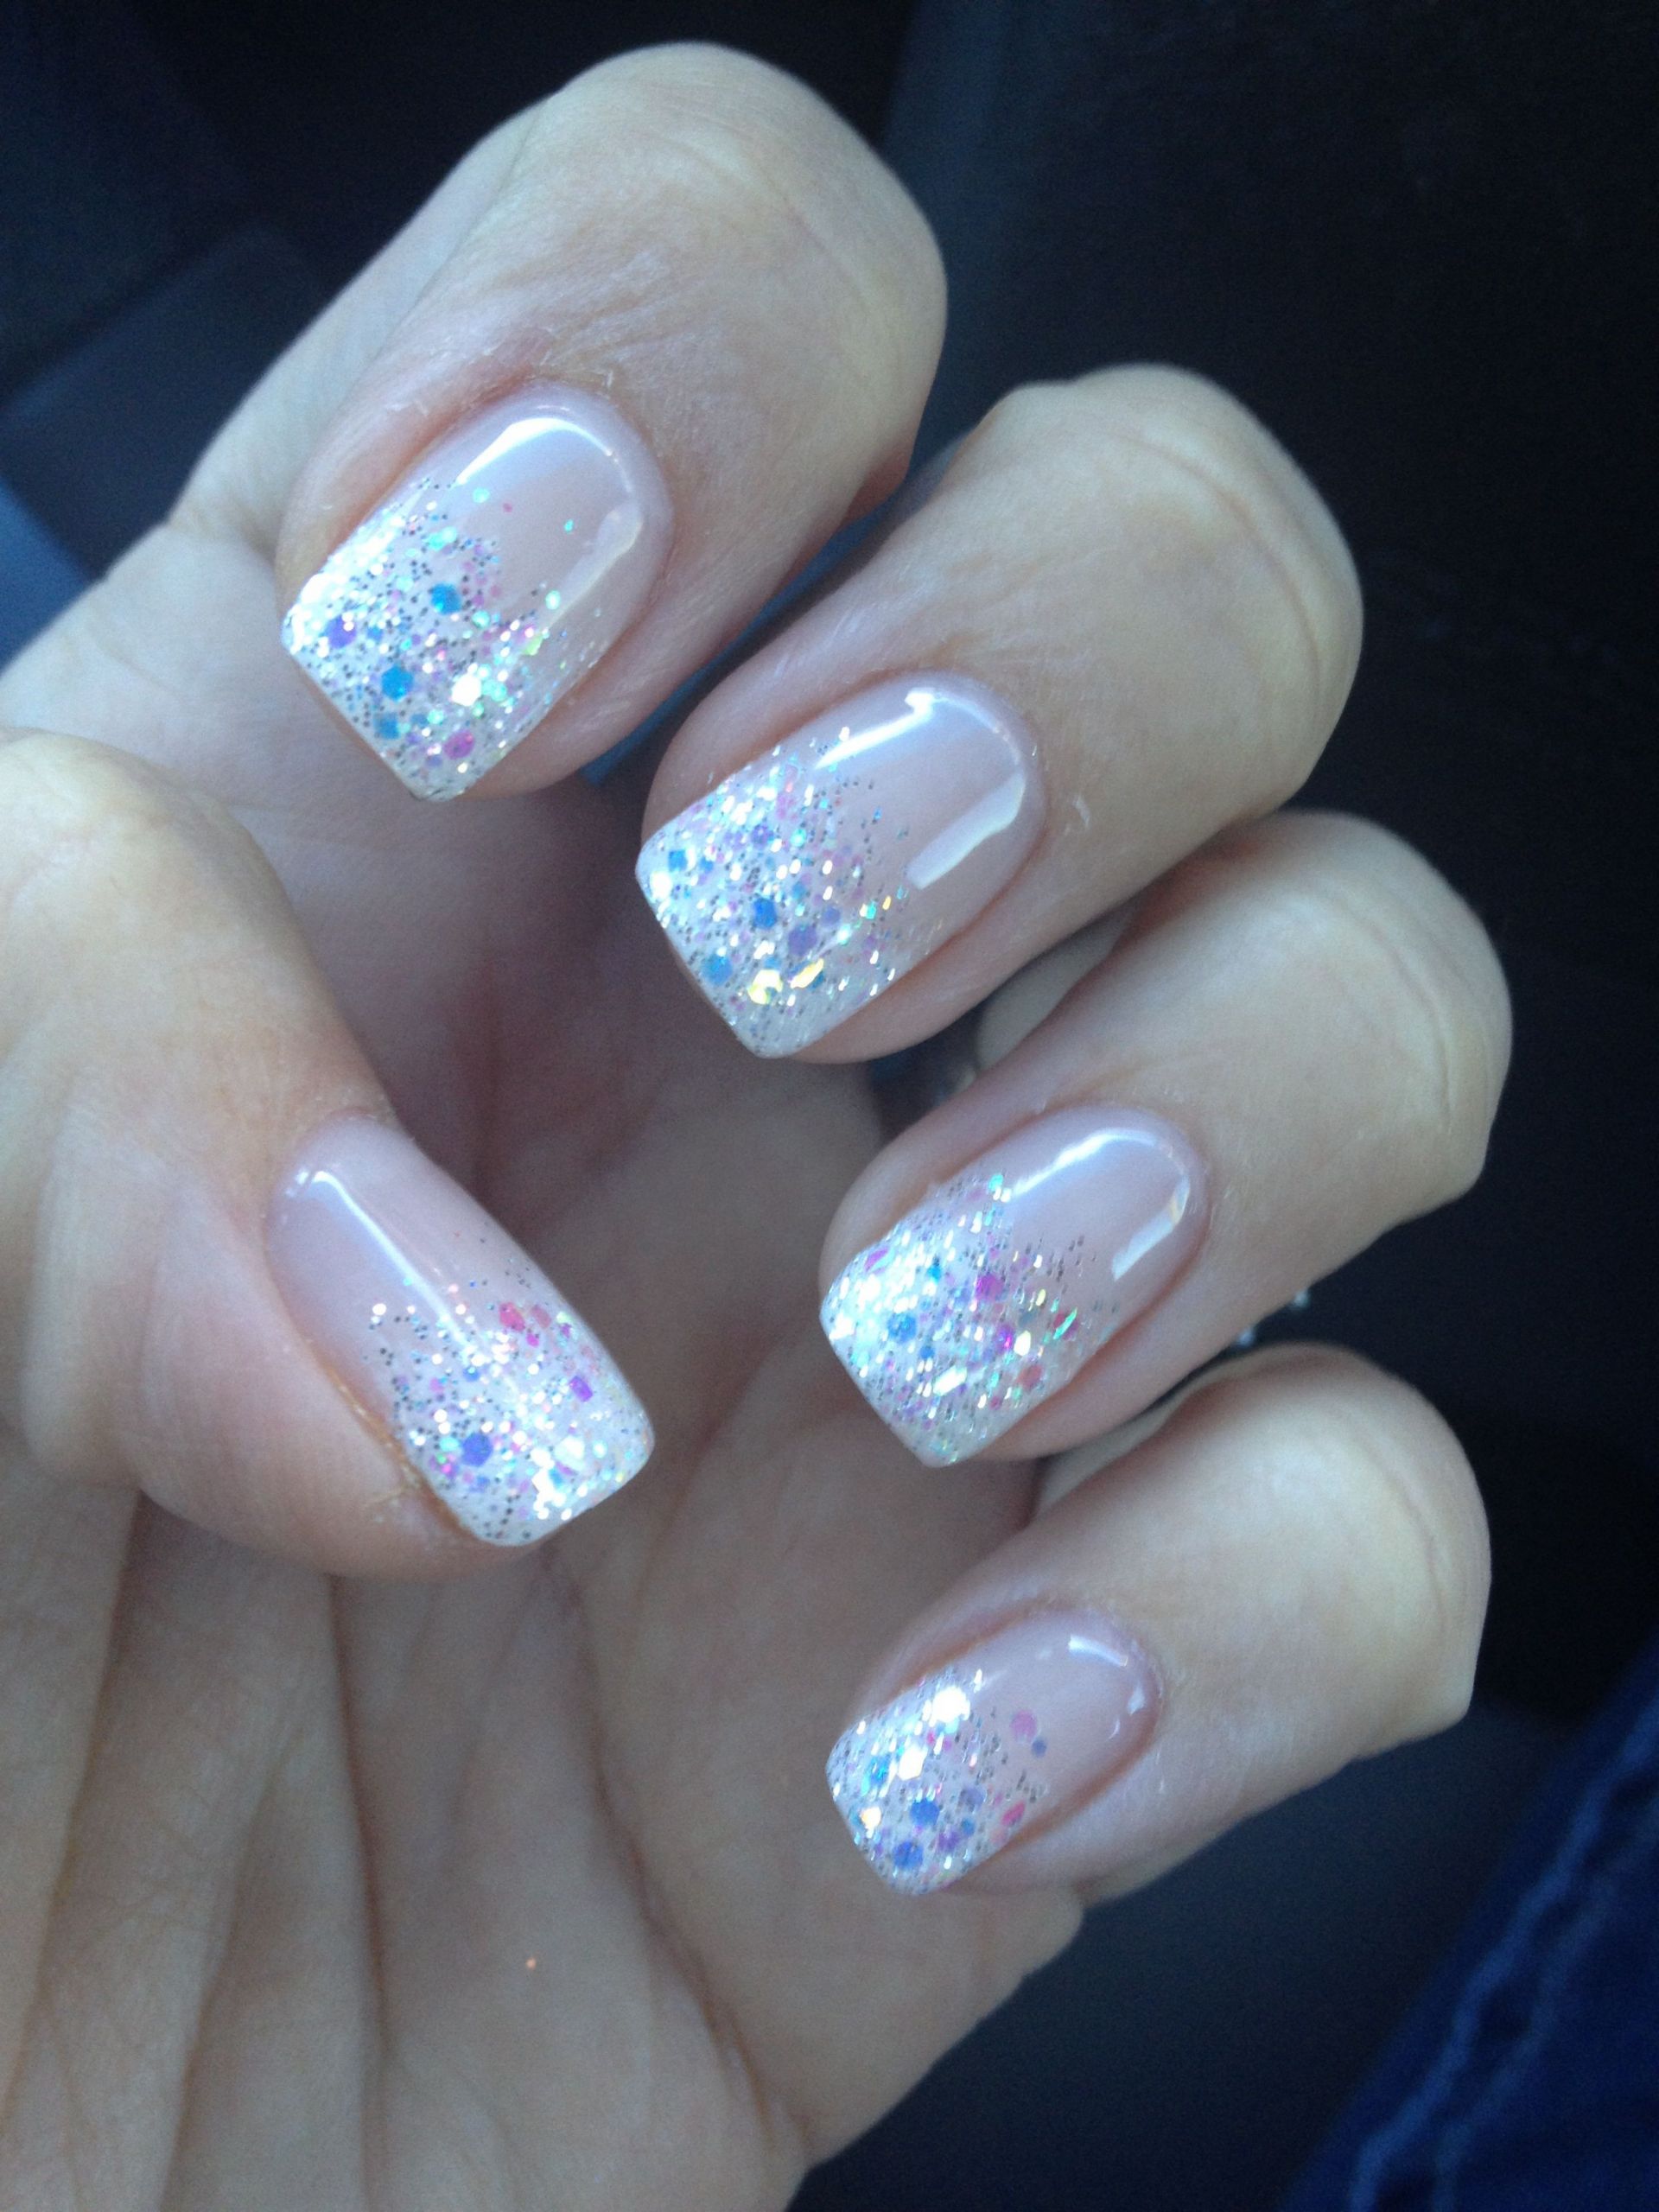 Gel Nails With Glitter Tips
 The perfect glitter french fade mani